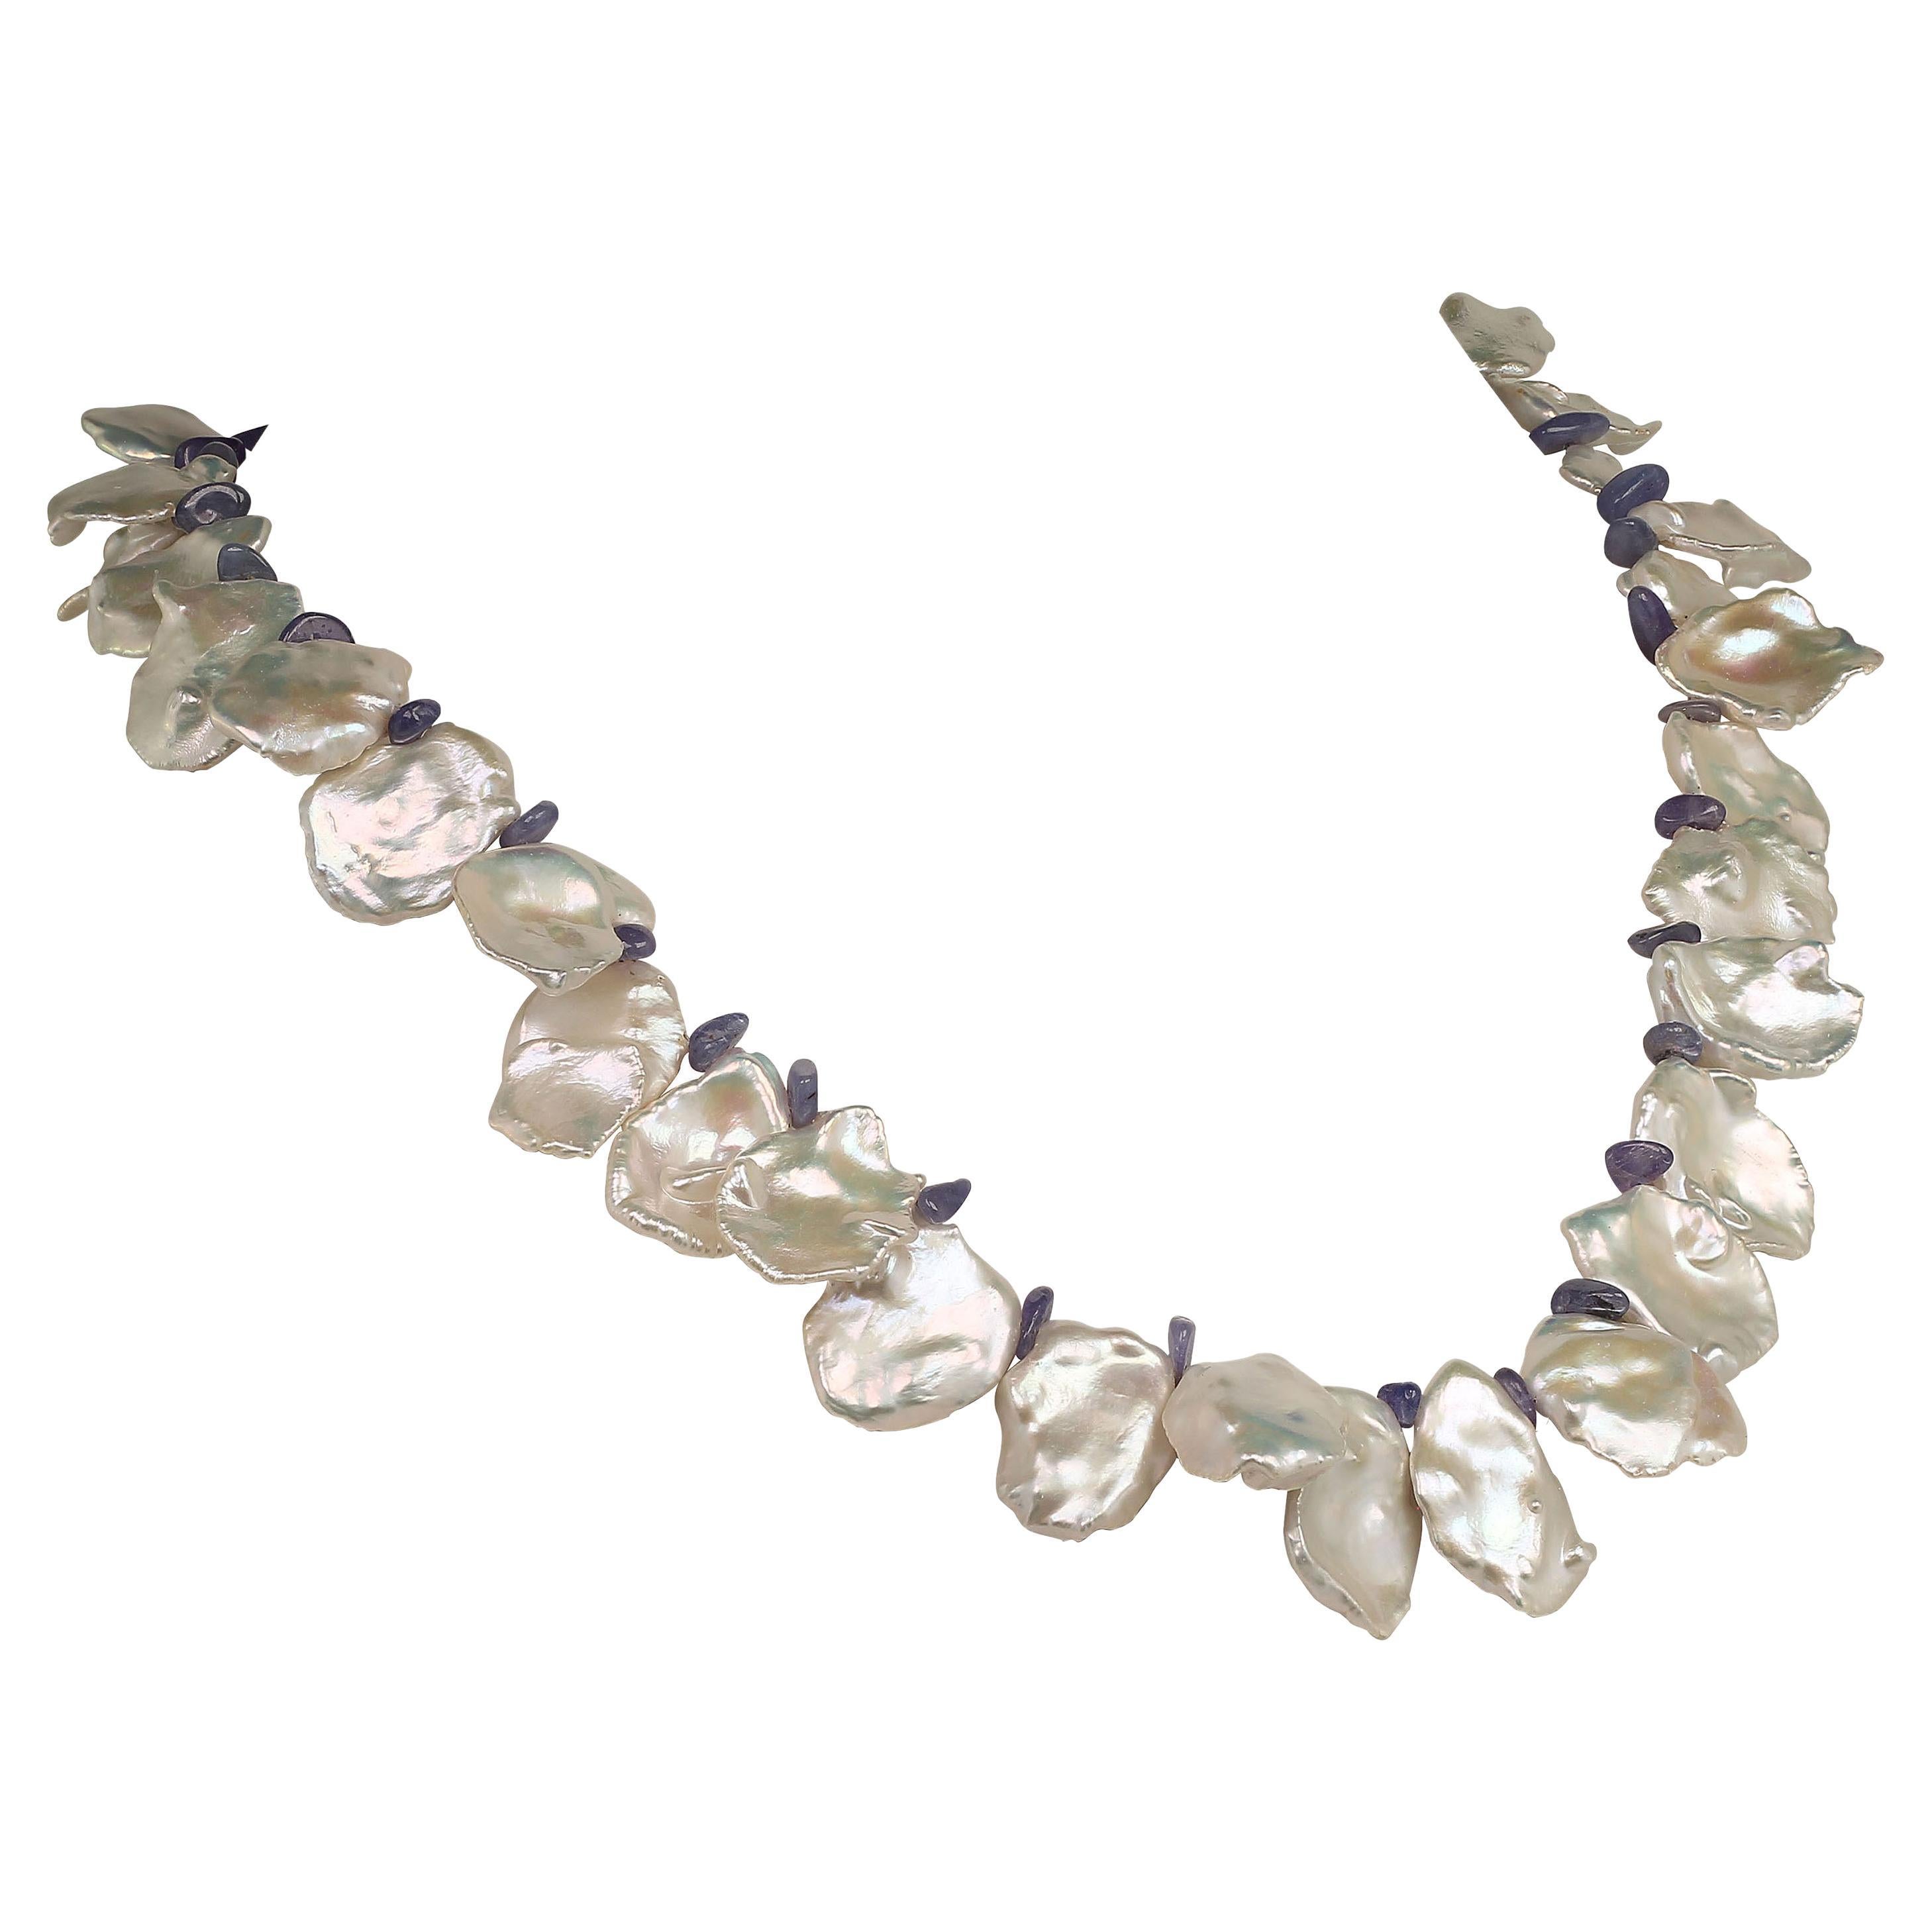 Because you deserve to wear Pearls

White and Blue, custom made Pearl necklace! Perfect for Spring. Wear these lovely large iridescent Keshi Pearls and Tanzanites with everything. They will enhance your entire wardrobe. The highly polished tumbled